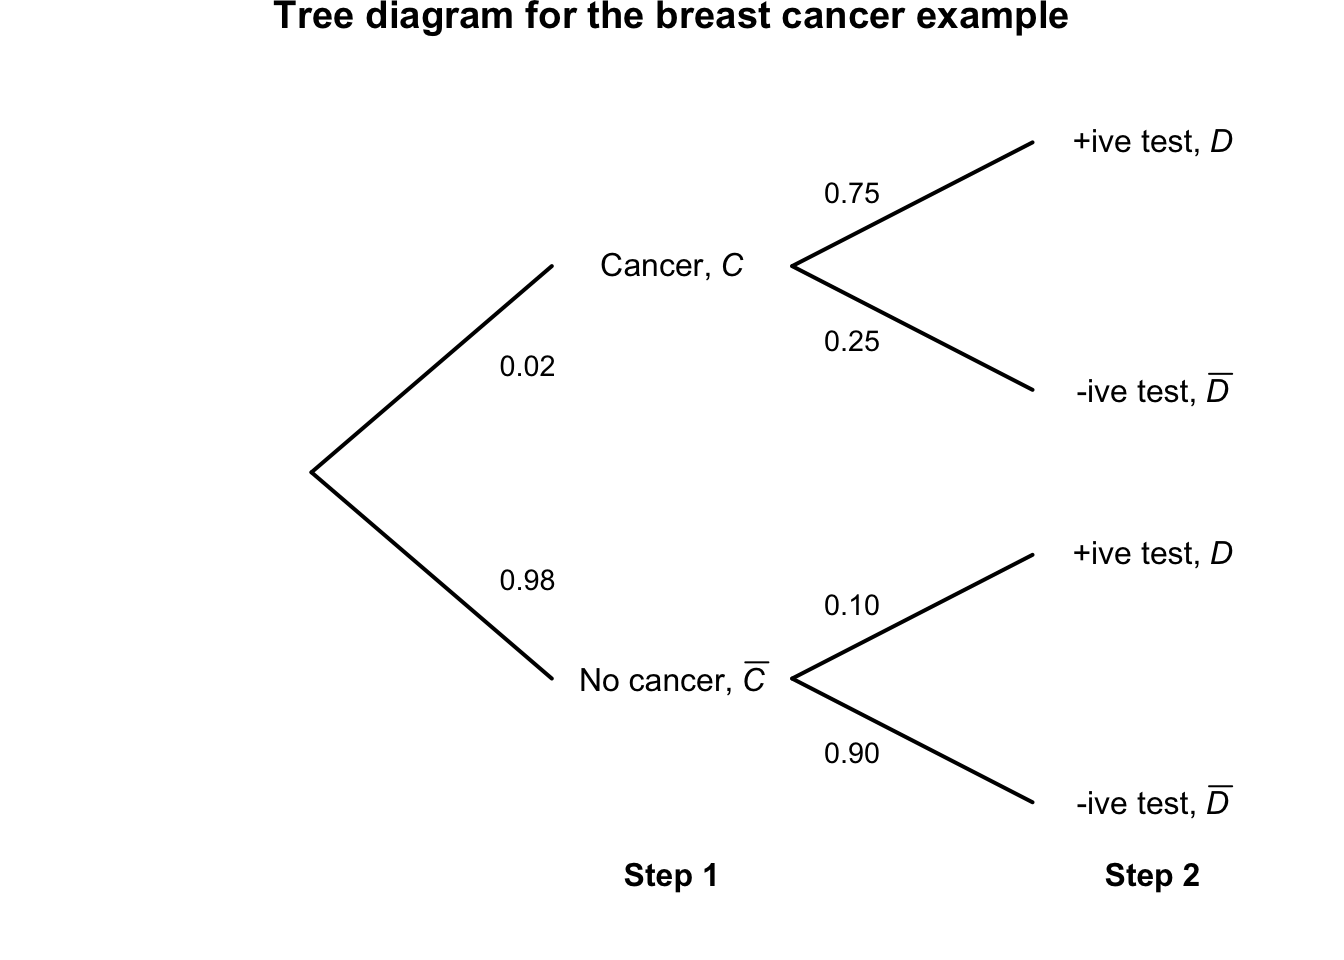 Tree diagram for the breast-cancer example